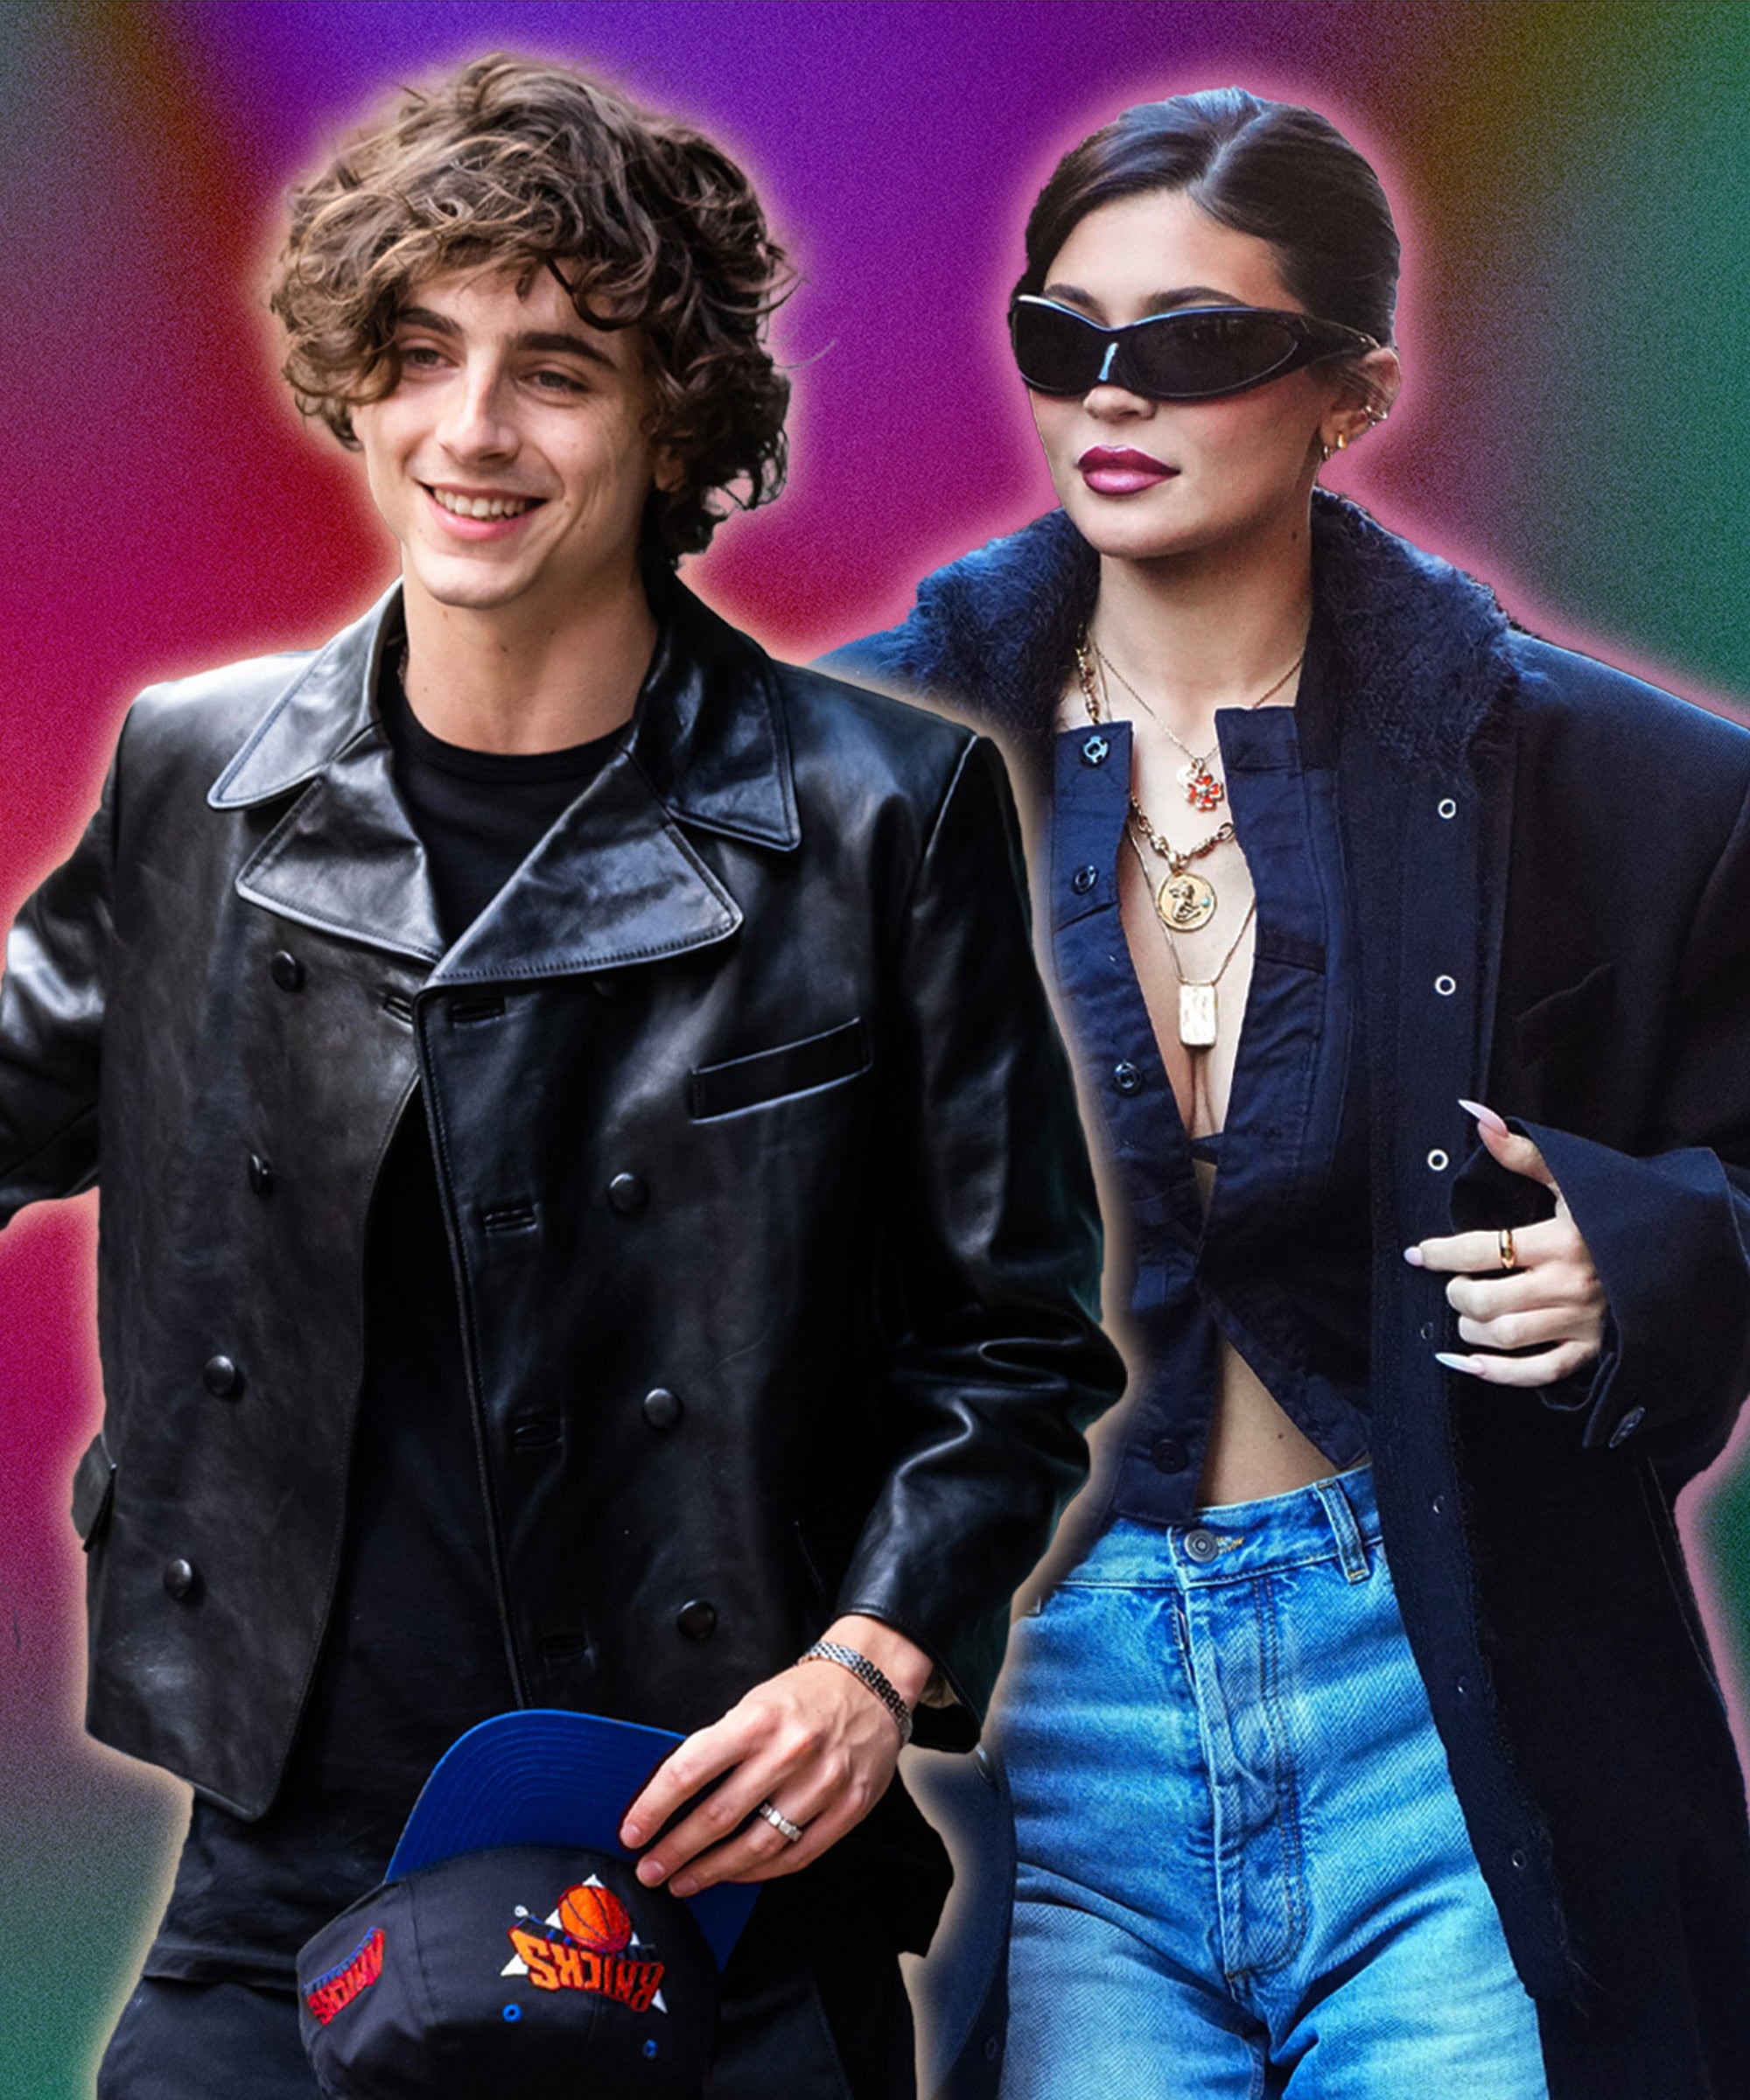 People are upset with Timothee Chalamet for dating Kylie Jenner #timot, kyliejenner